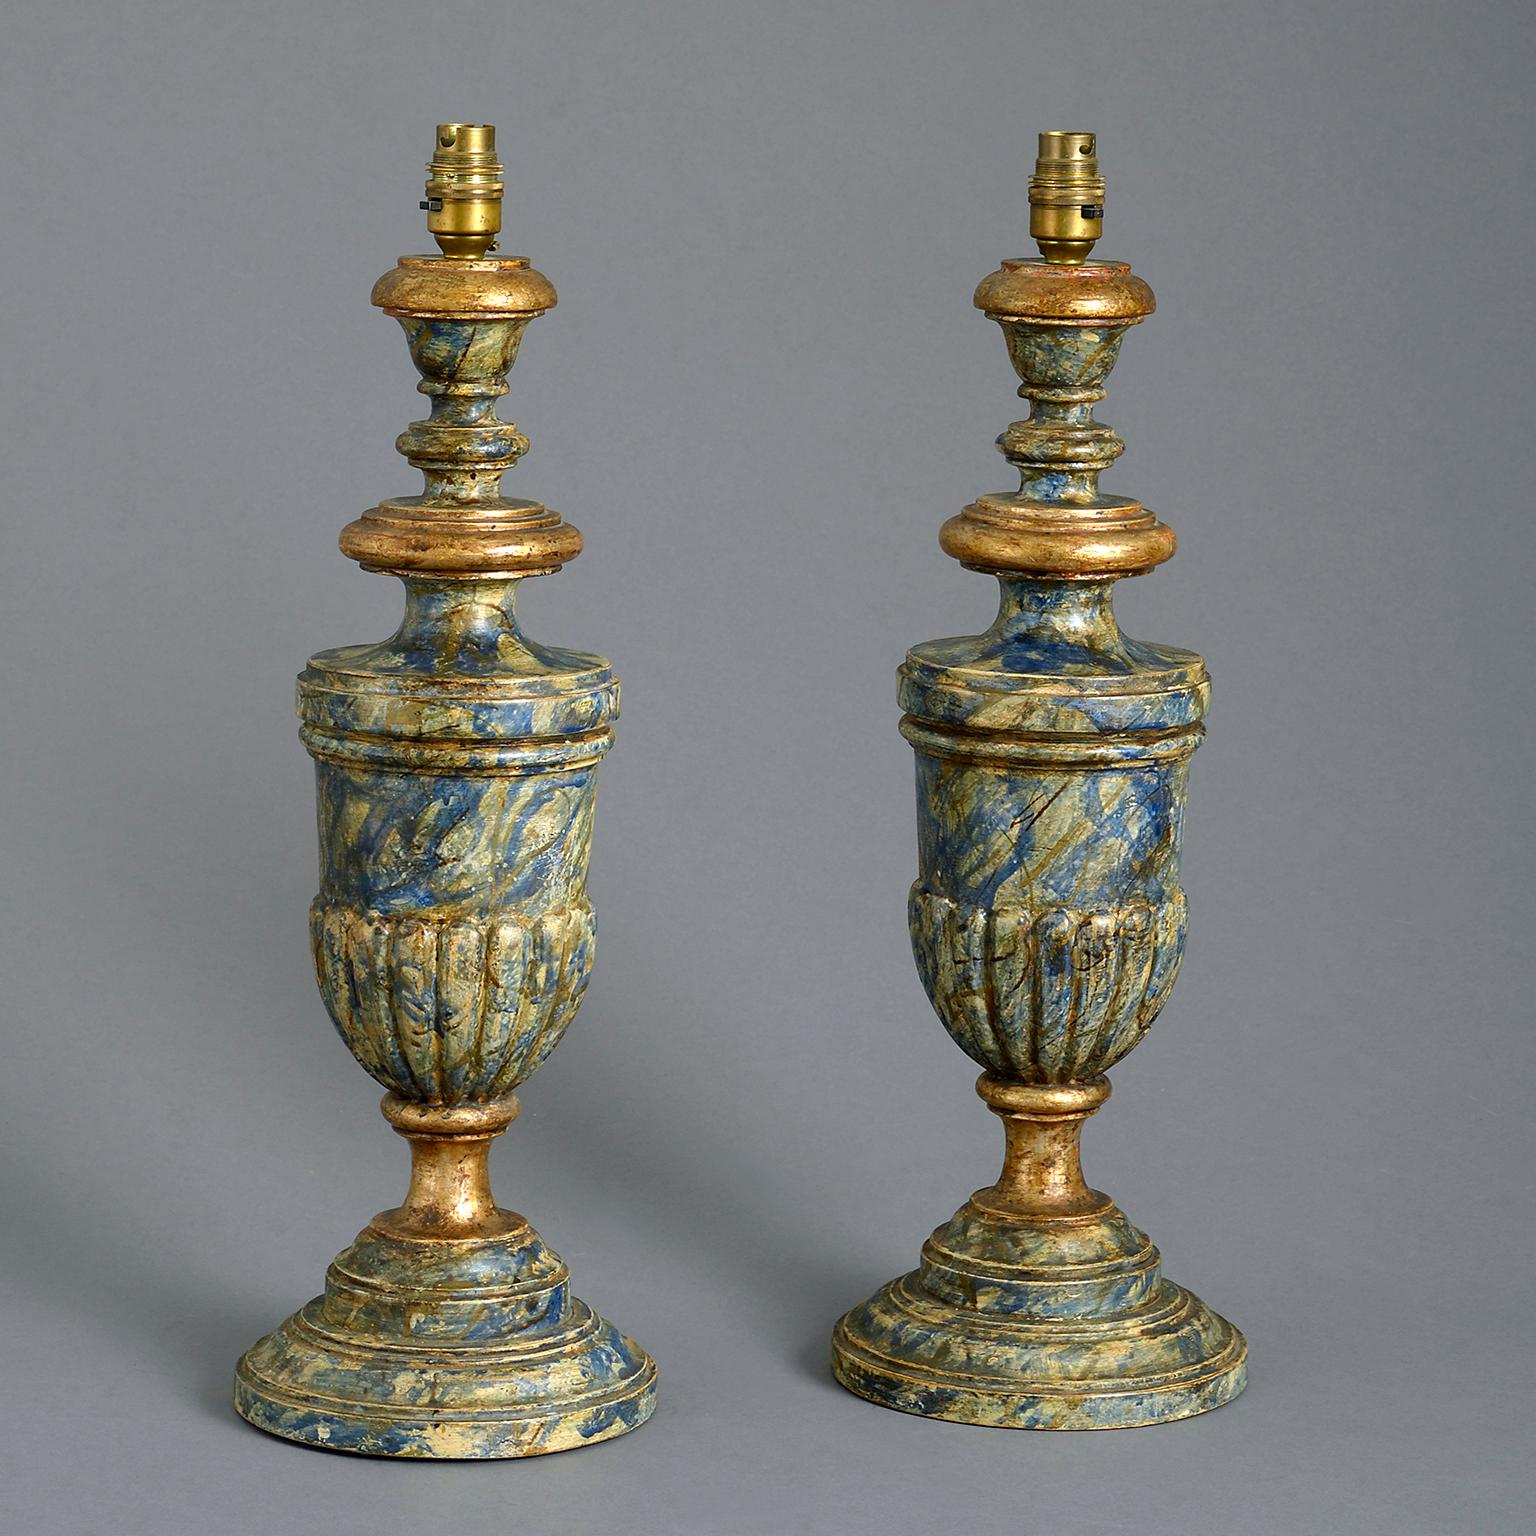 A pair of early 20th century faux marble lamps in the form of elongated campana urns with gadrooned bowls standing on waisted socles and stepped bases; beautifully decorated by hand with a faux marble and gilt surface. Wired with silk-braided flex.